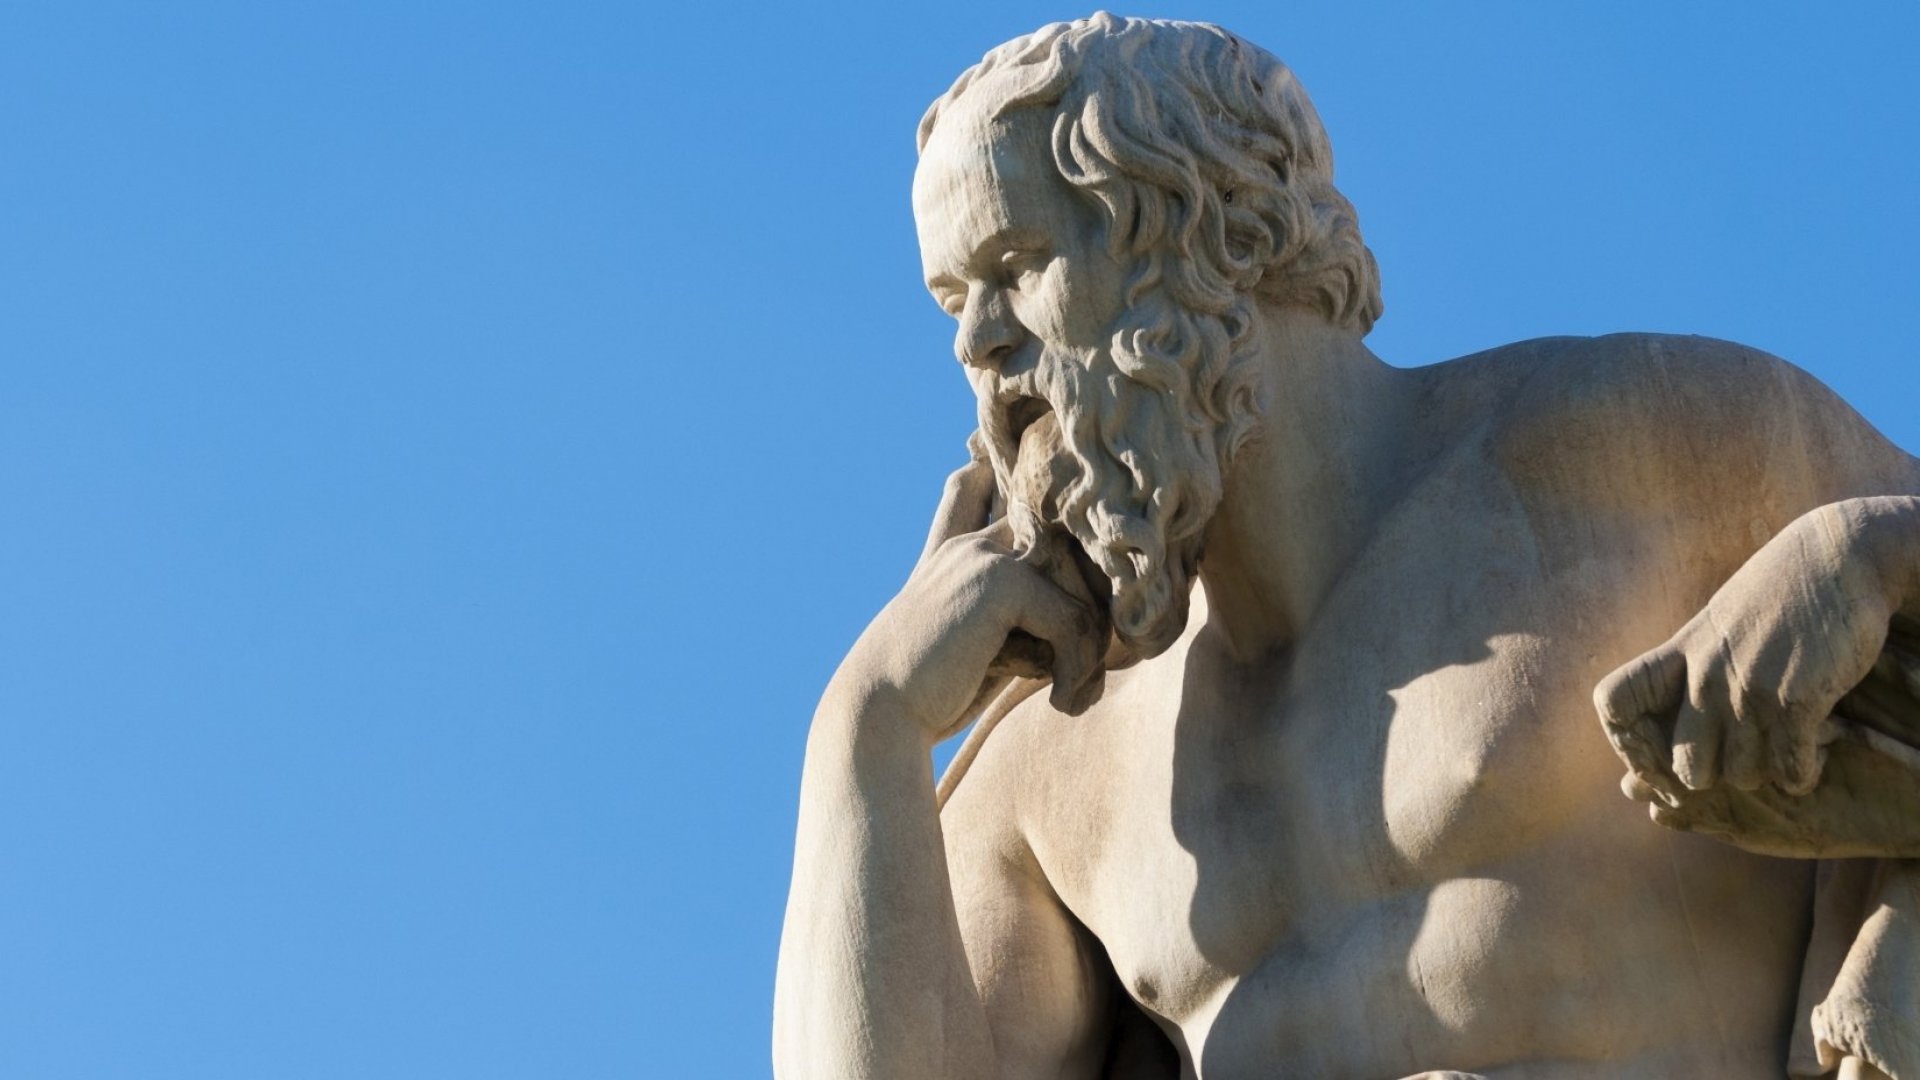 Quotes From Greek Philosophers For When You Need A Productivity Pick Me Up